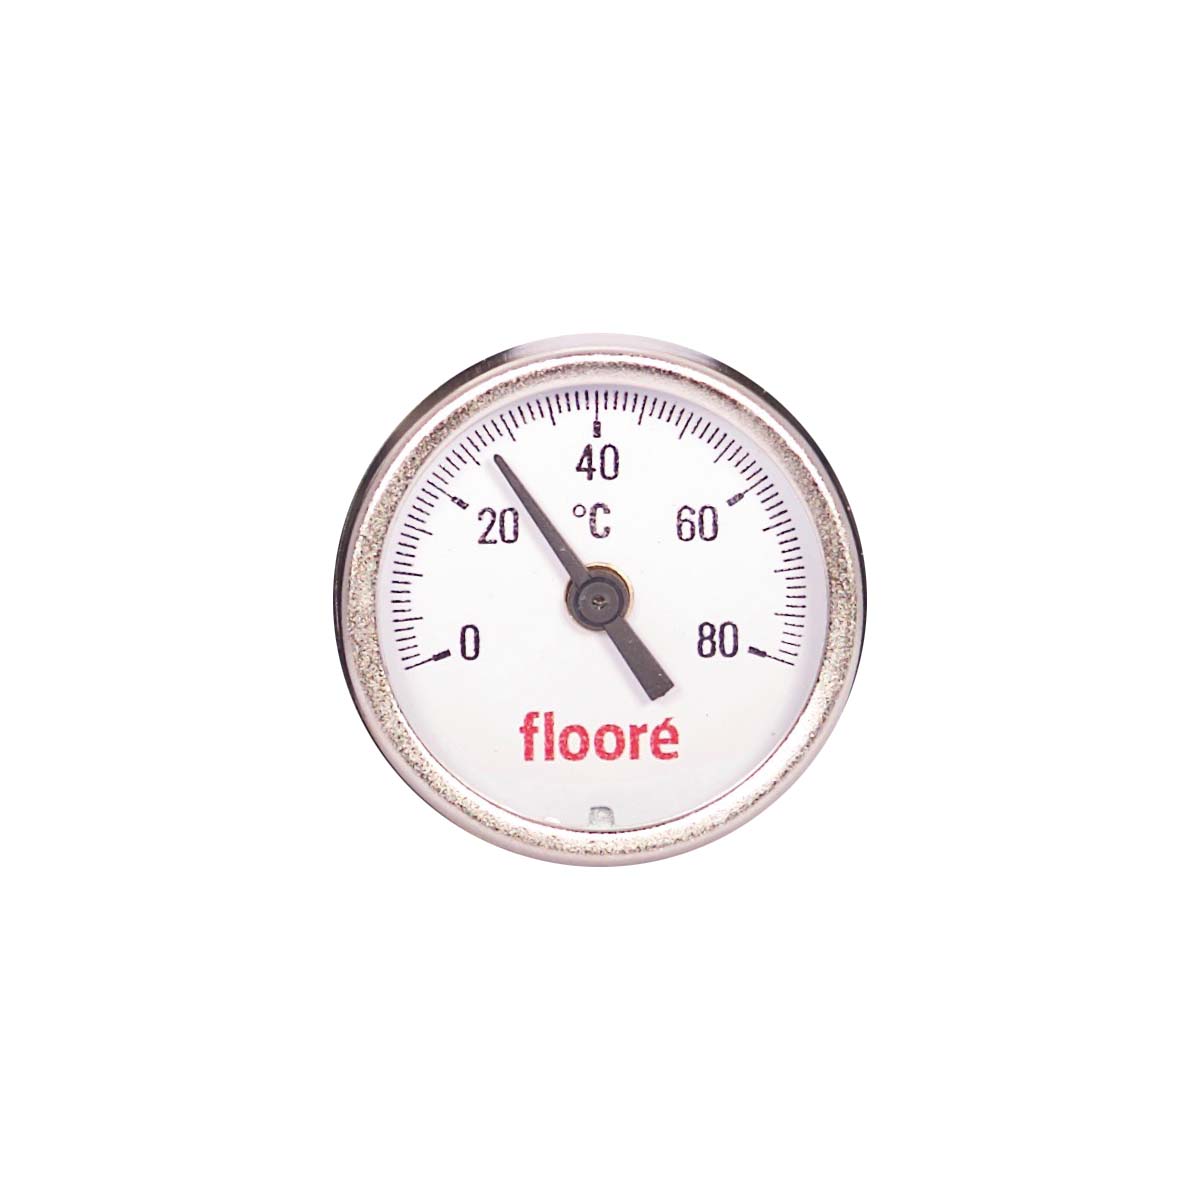 Featured image for “Thermometer for underfloor heating manifold”